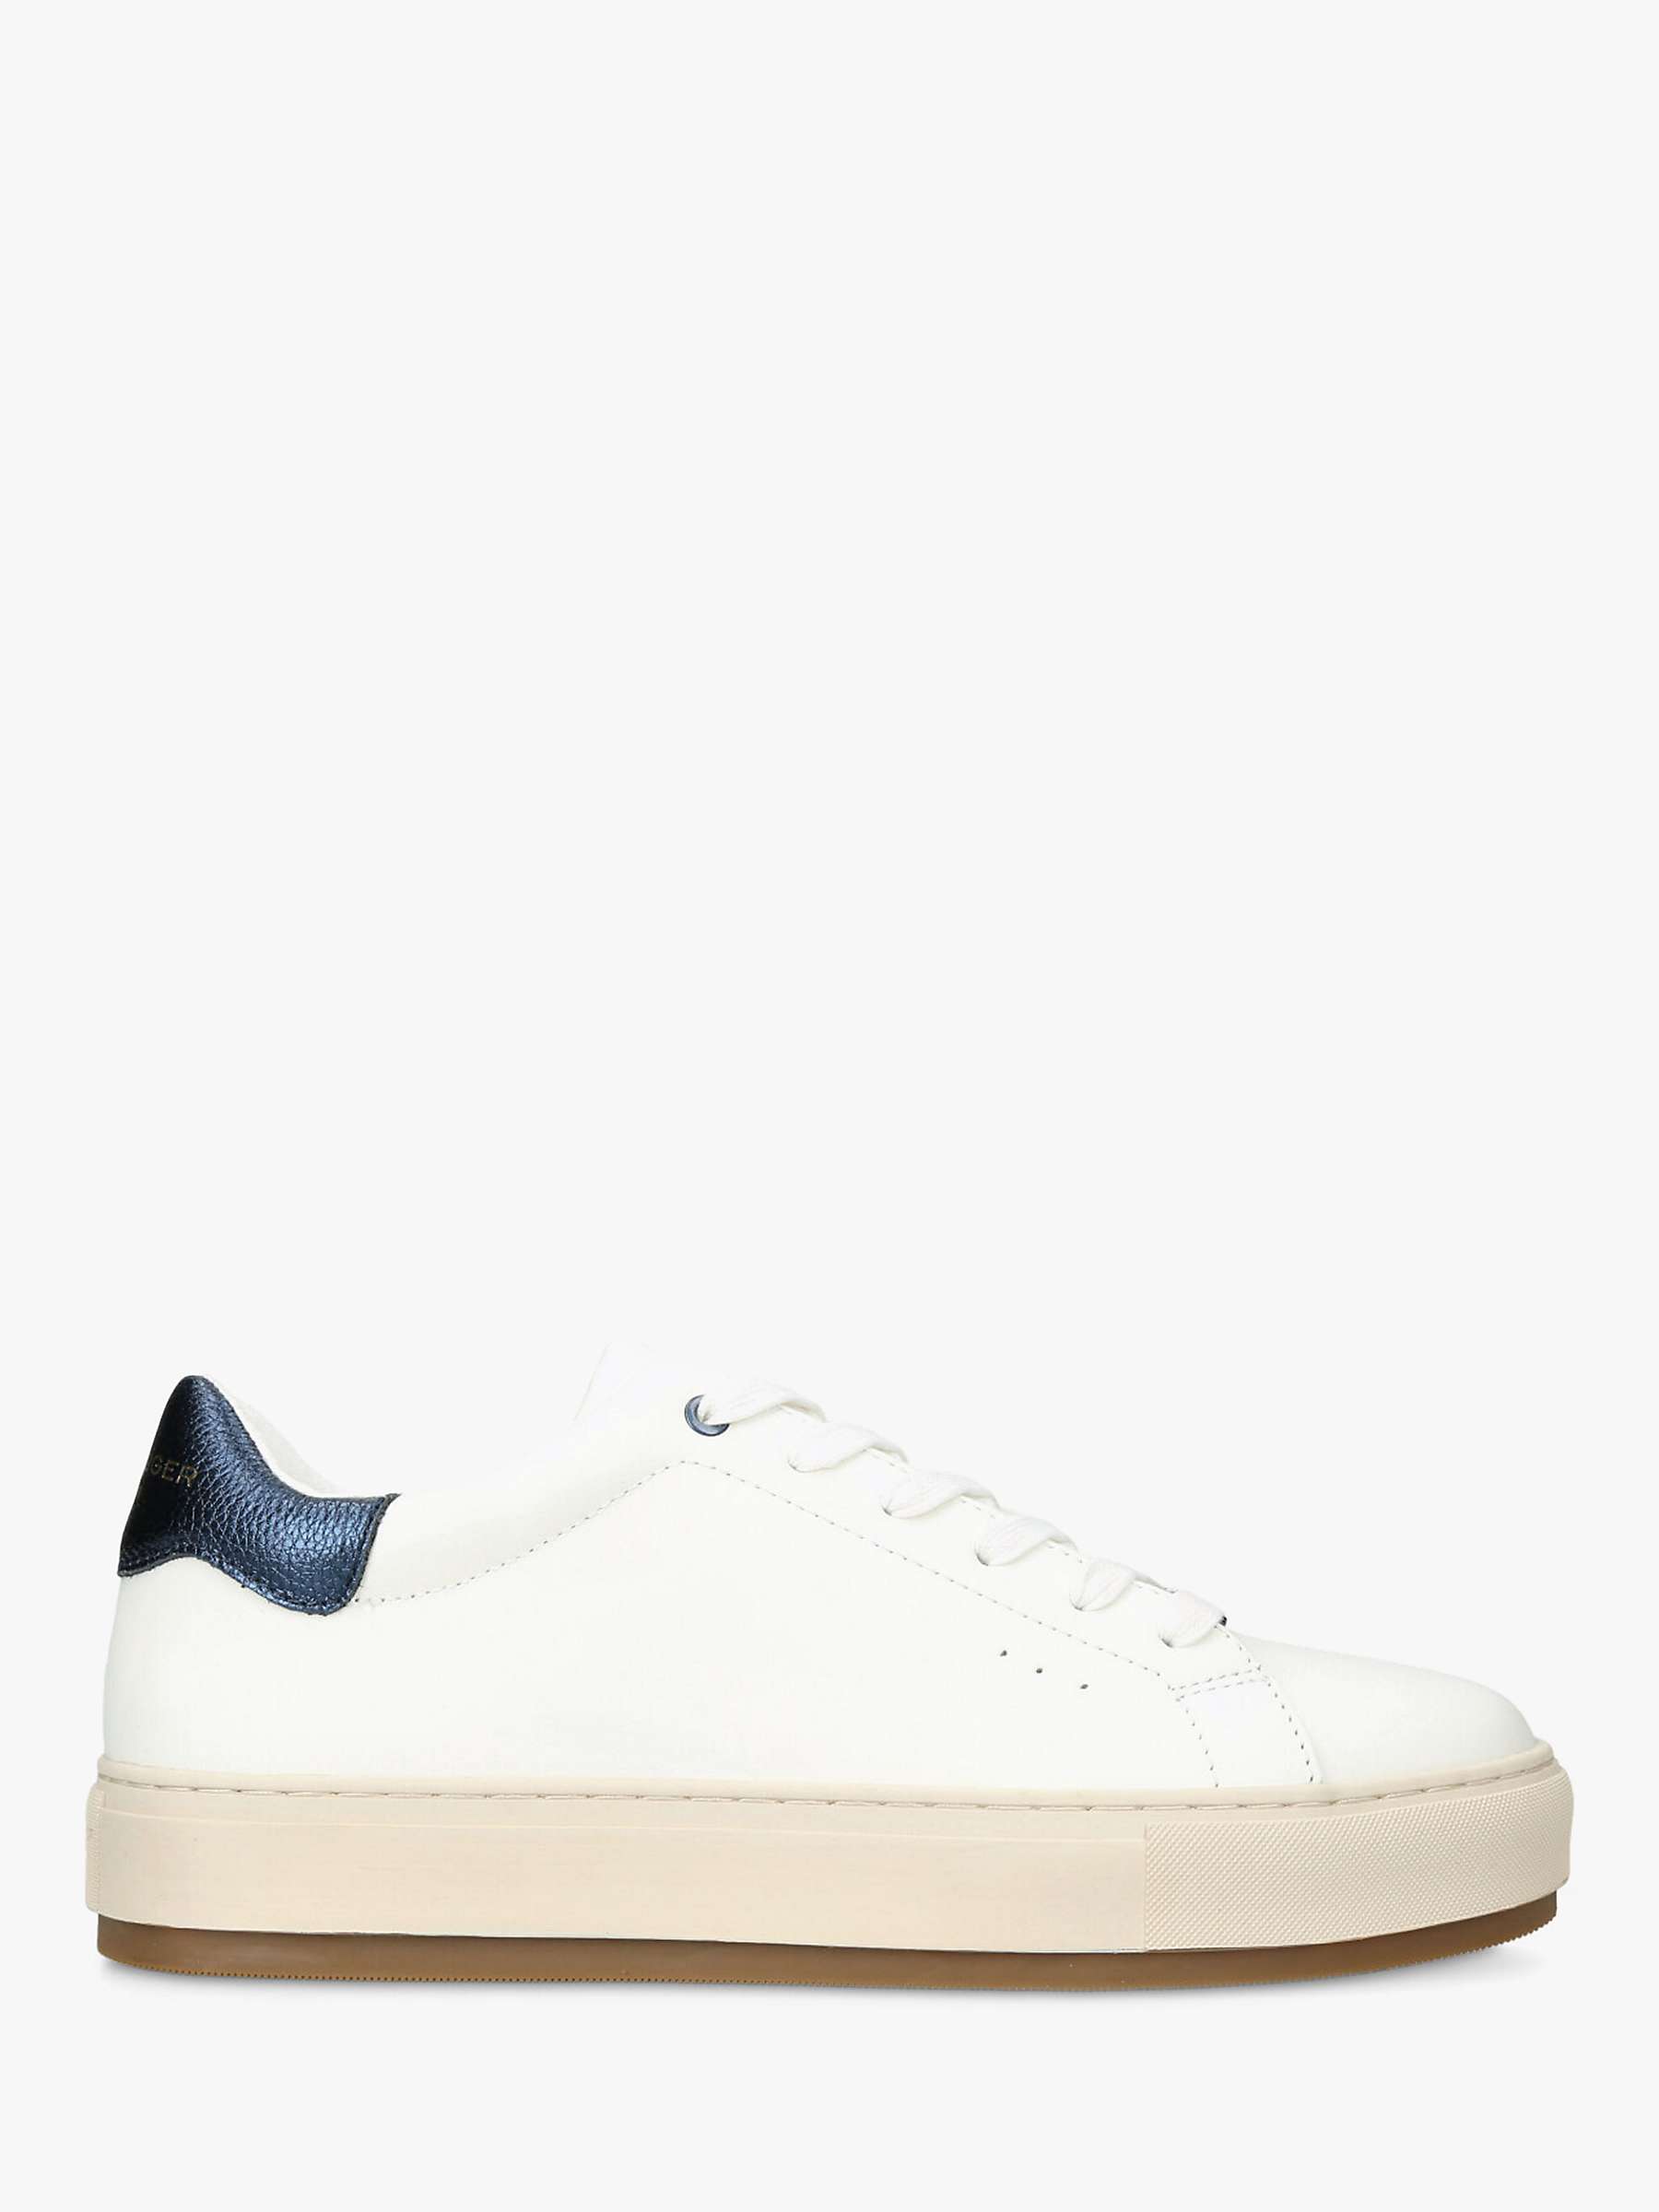 Buy Kurt Geiger London Laney 3 Leather Trainers, White/Multi Online at johnlewis.com